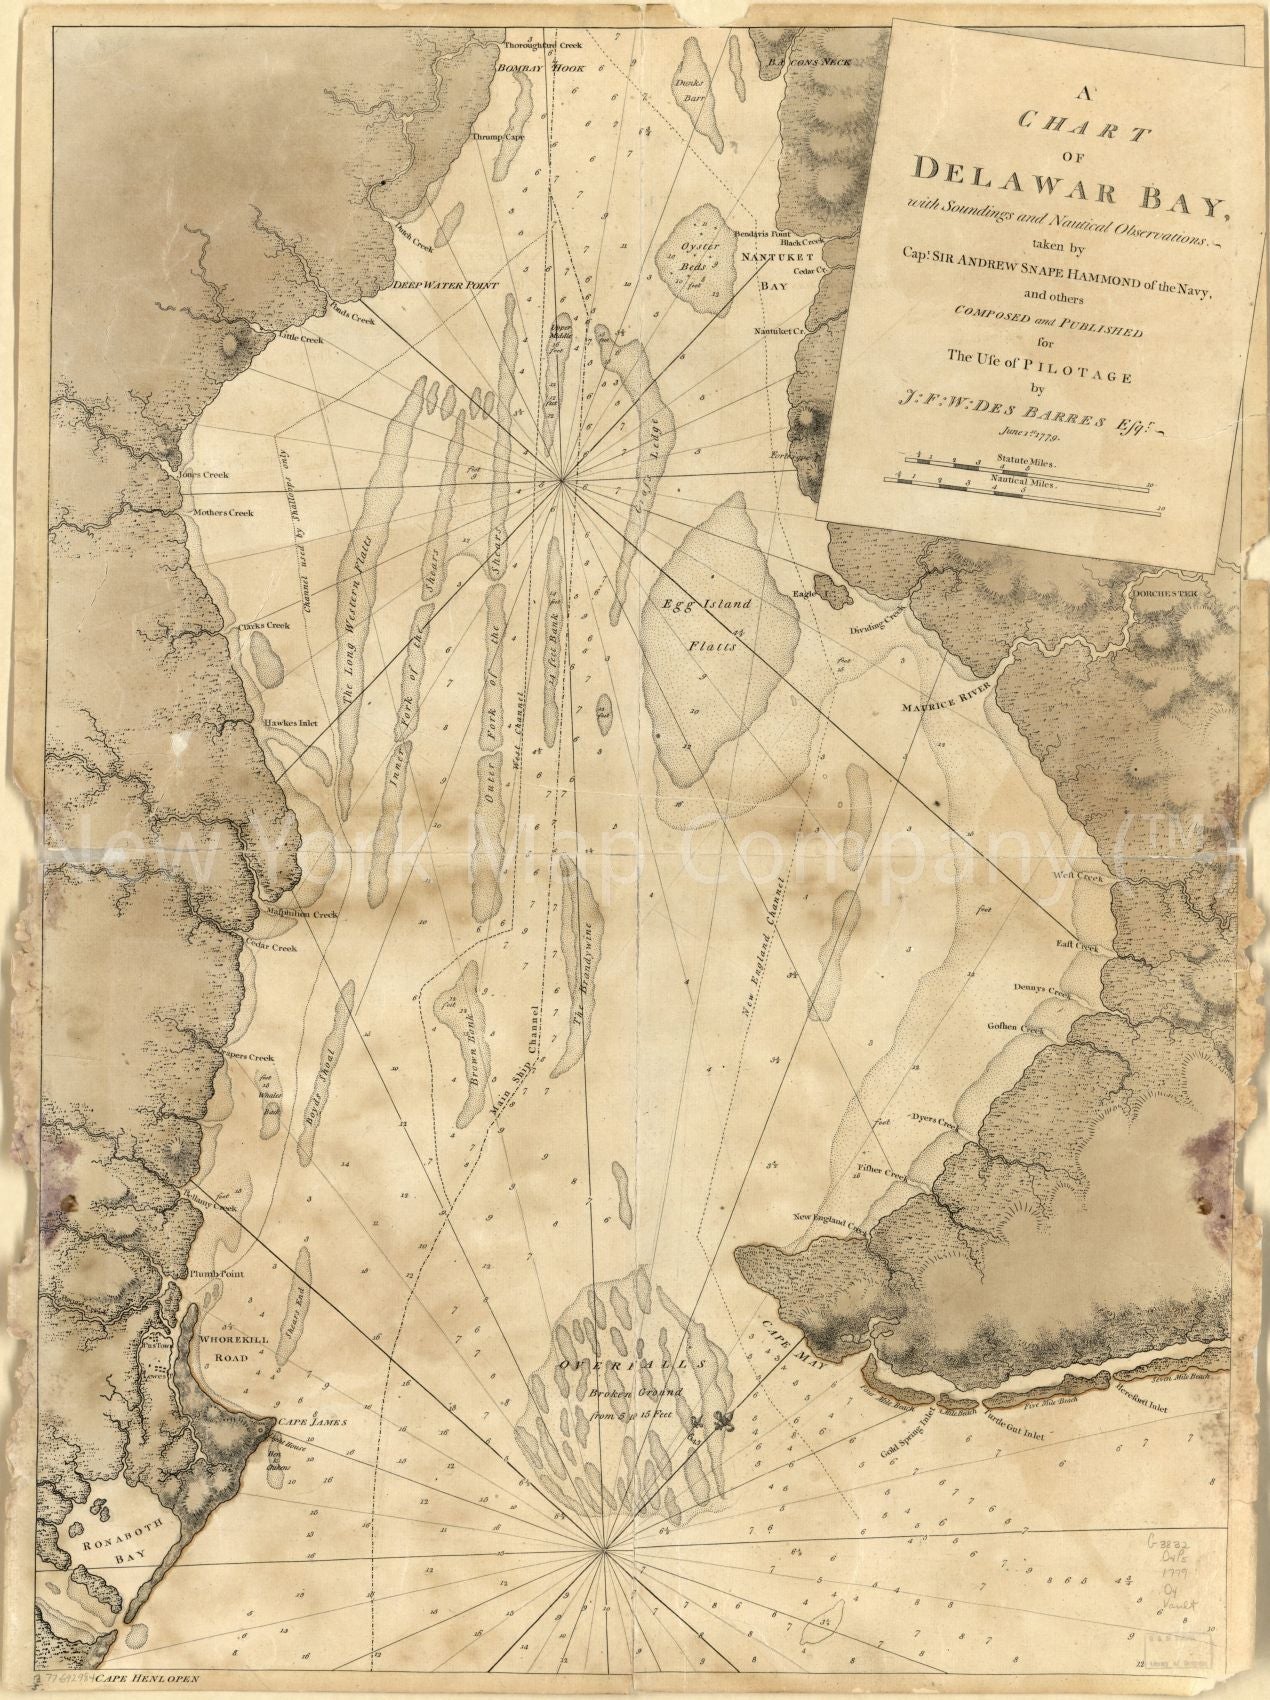 1779 map A chart of Delawar Bay, with soundings and nautical observations. Map Subjects: Delaware | Delaware Bay | Delaware Bay Del And NJ | Delaware River | Delaware River NY-DEL And NJ | Nautical Charts | New Jersey |